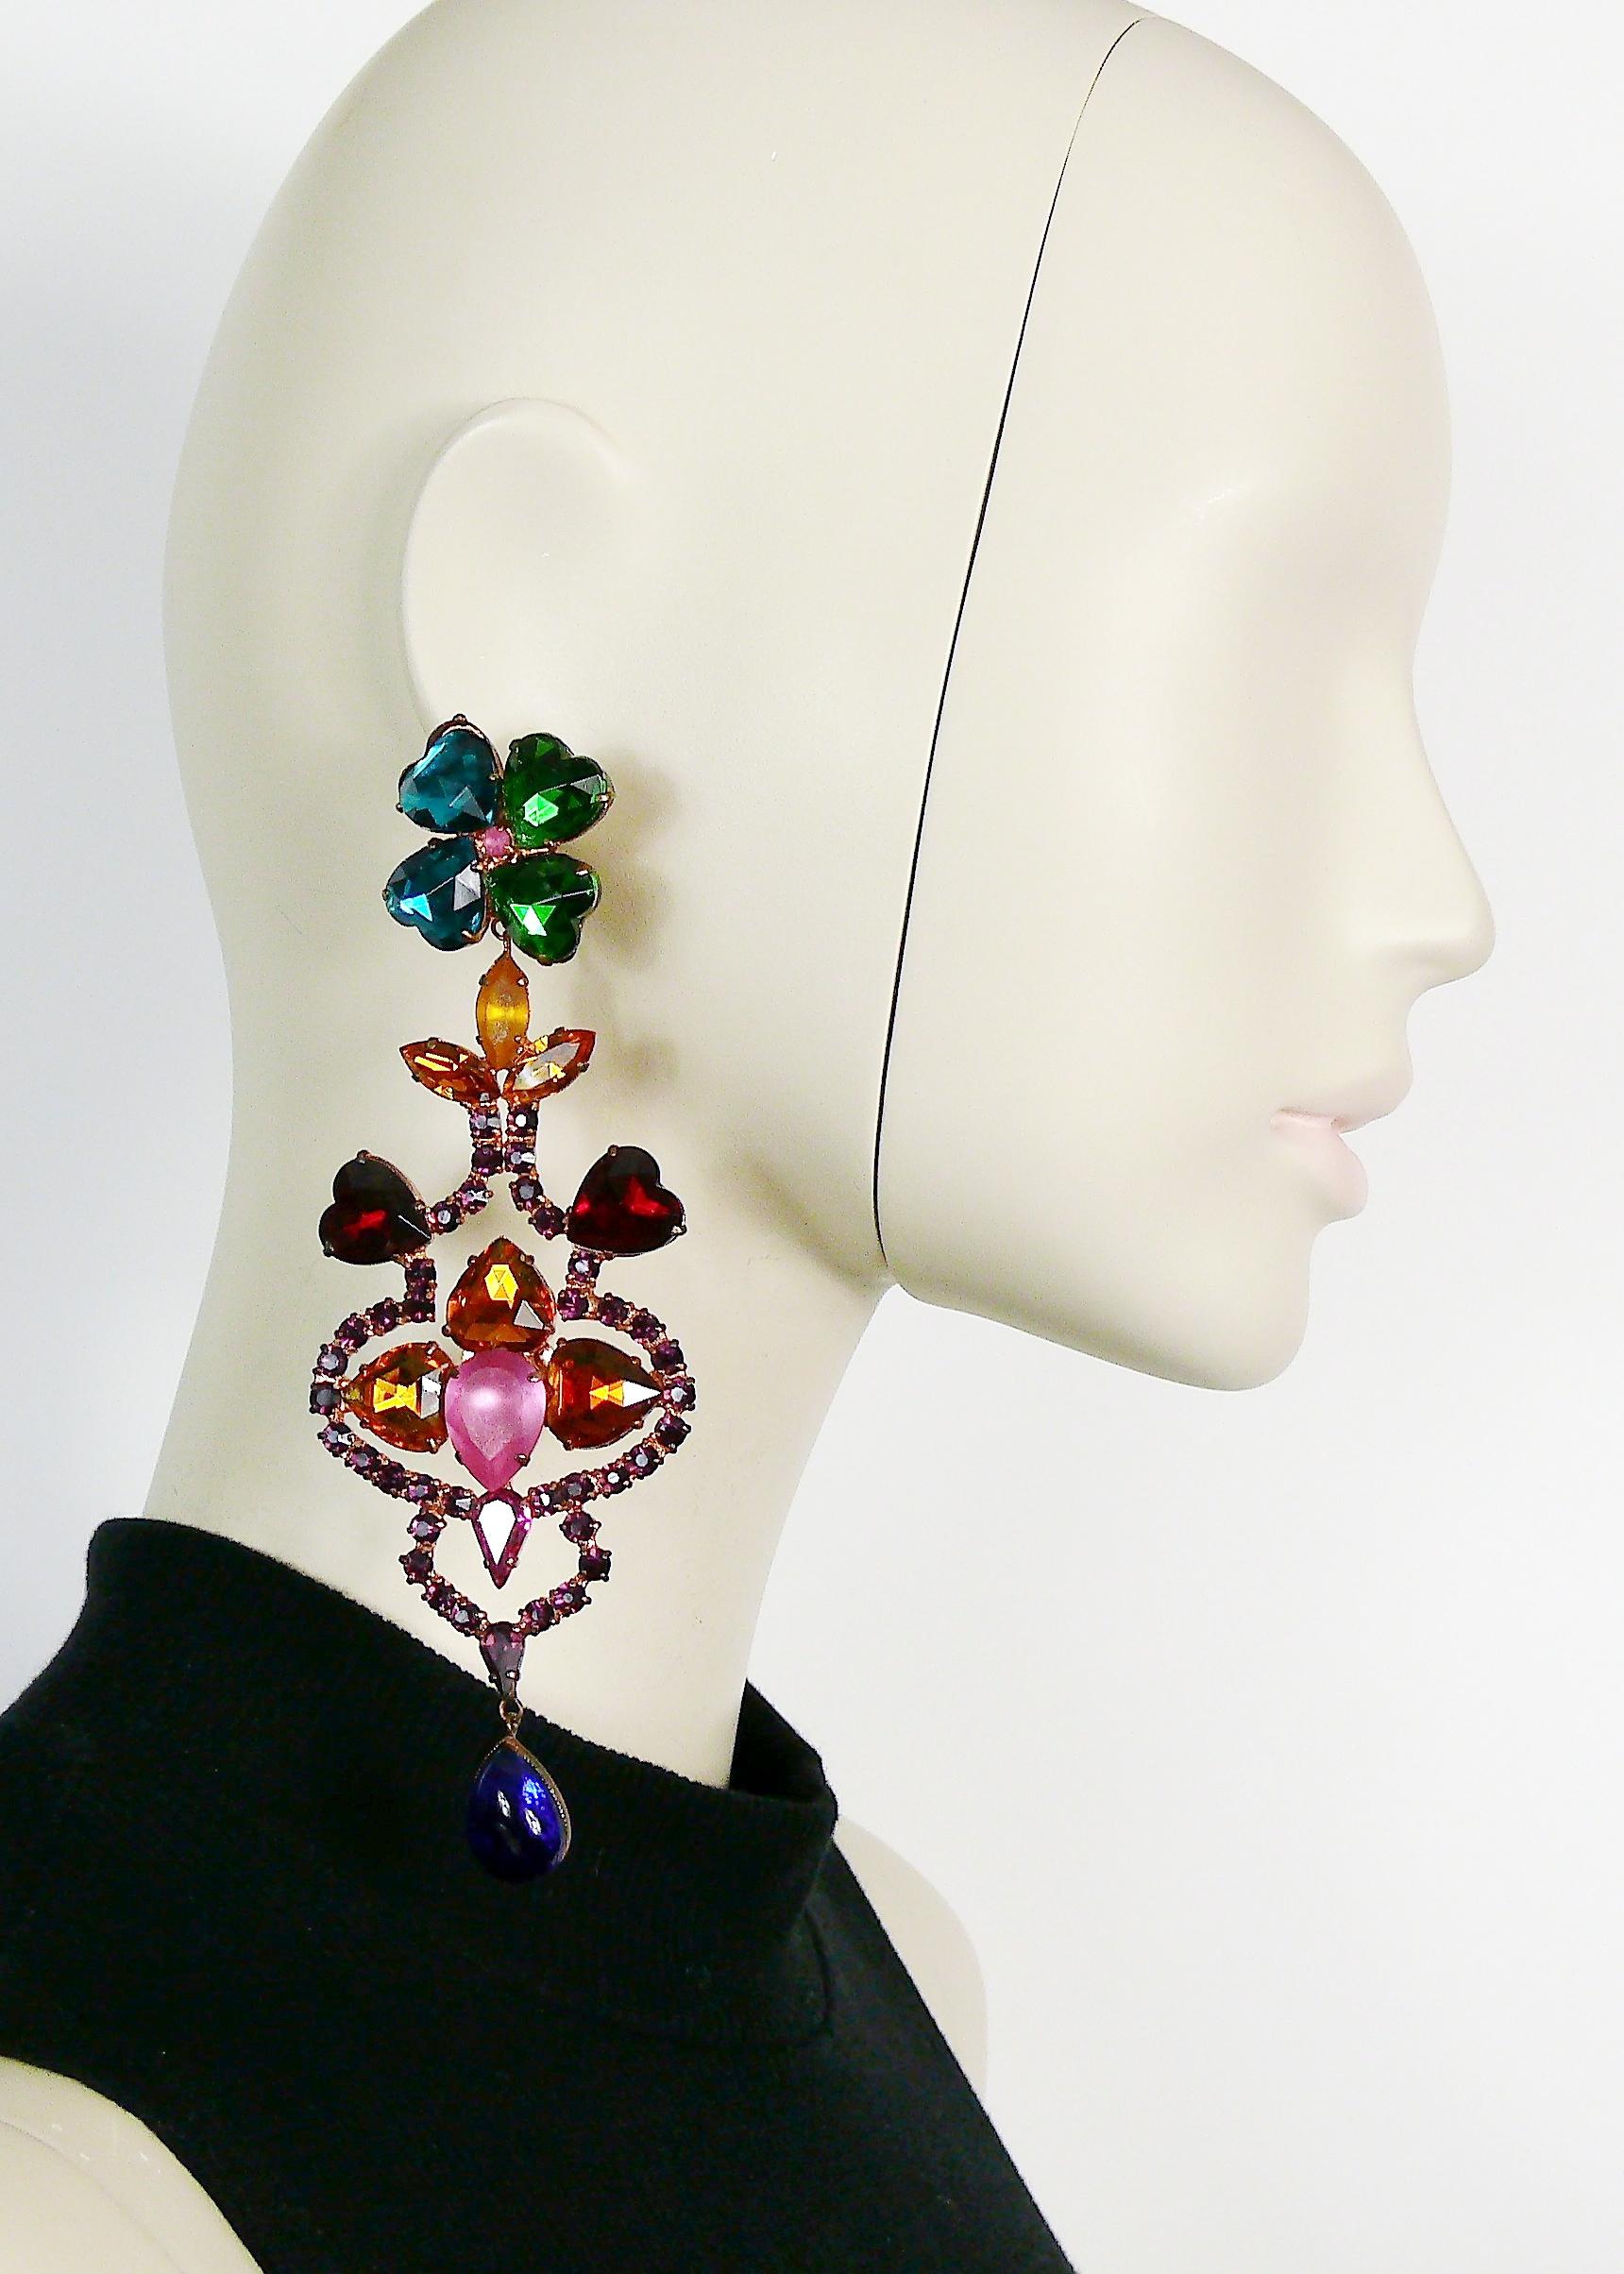 YVES SAINT LAURENT RIVE GAUCHE vintage gorgeous and rare shoulder duster dangling earrings (clip-on) featuring multicolored crystals and glass cabochon in a copper patina setting.

Marked YVES SAINT LAURENT RIVE GAUCHE Made in France.

Indicative